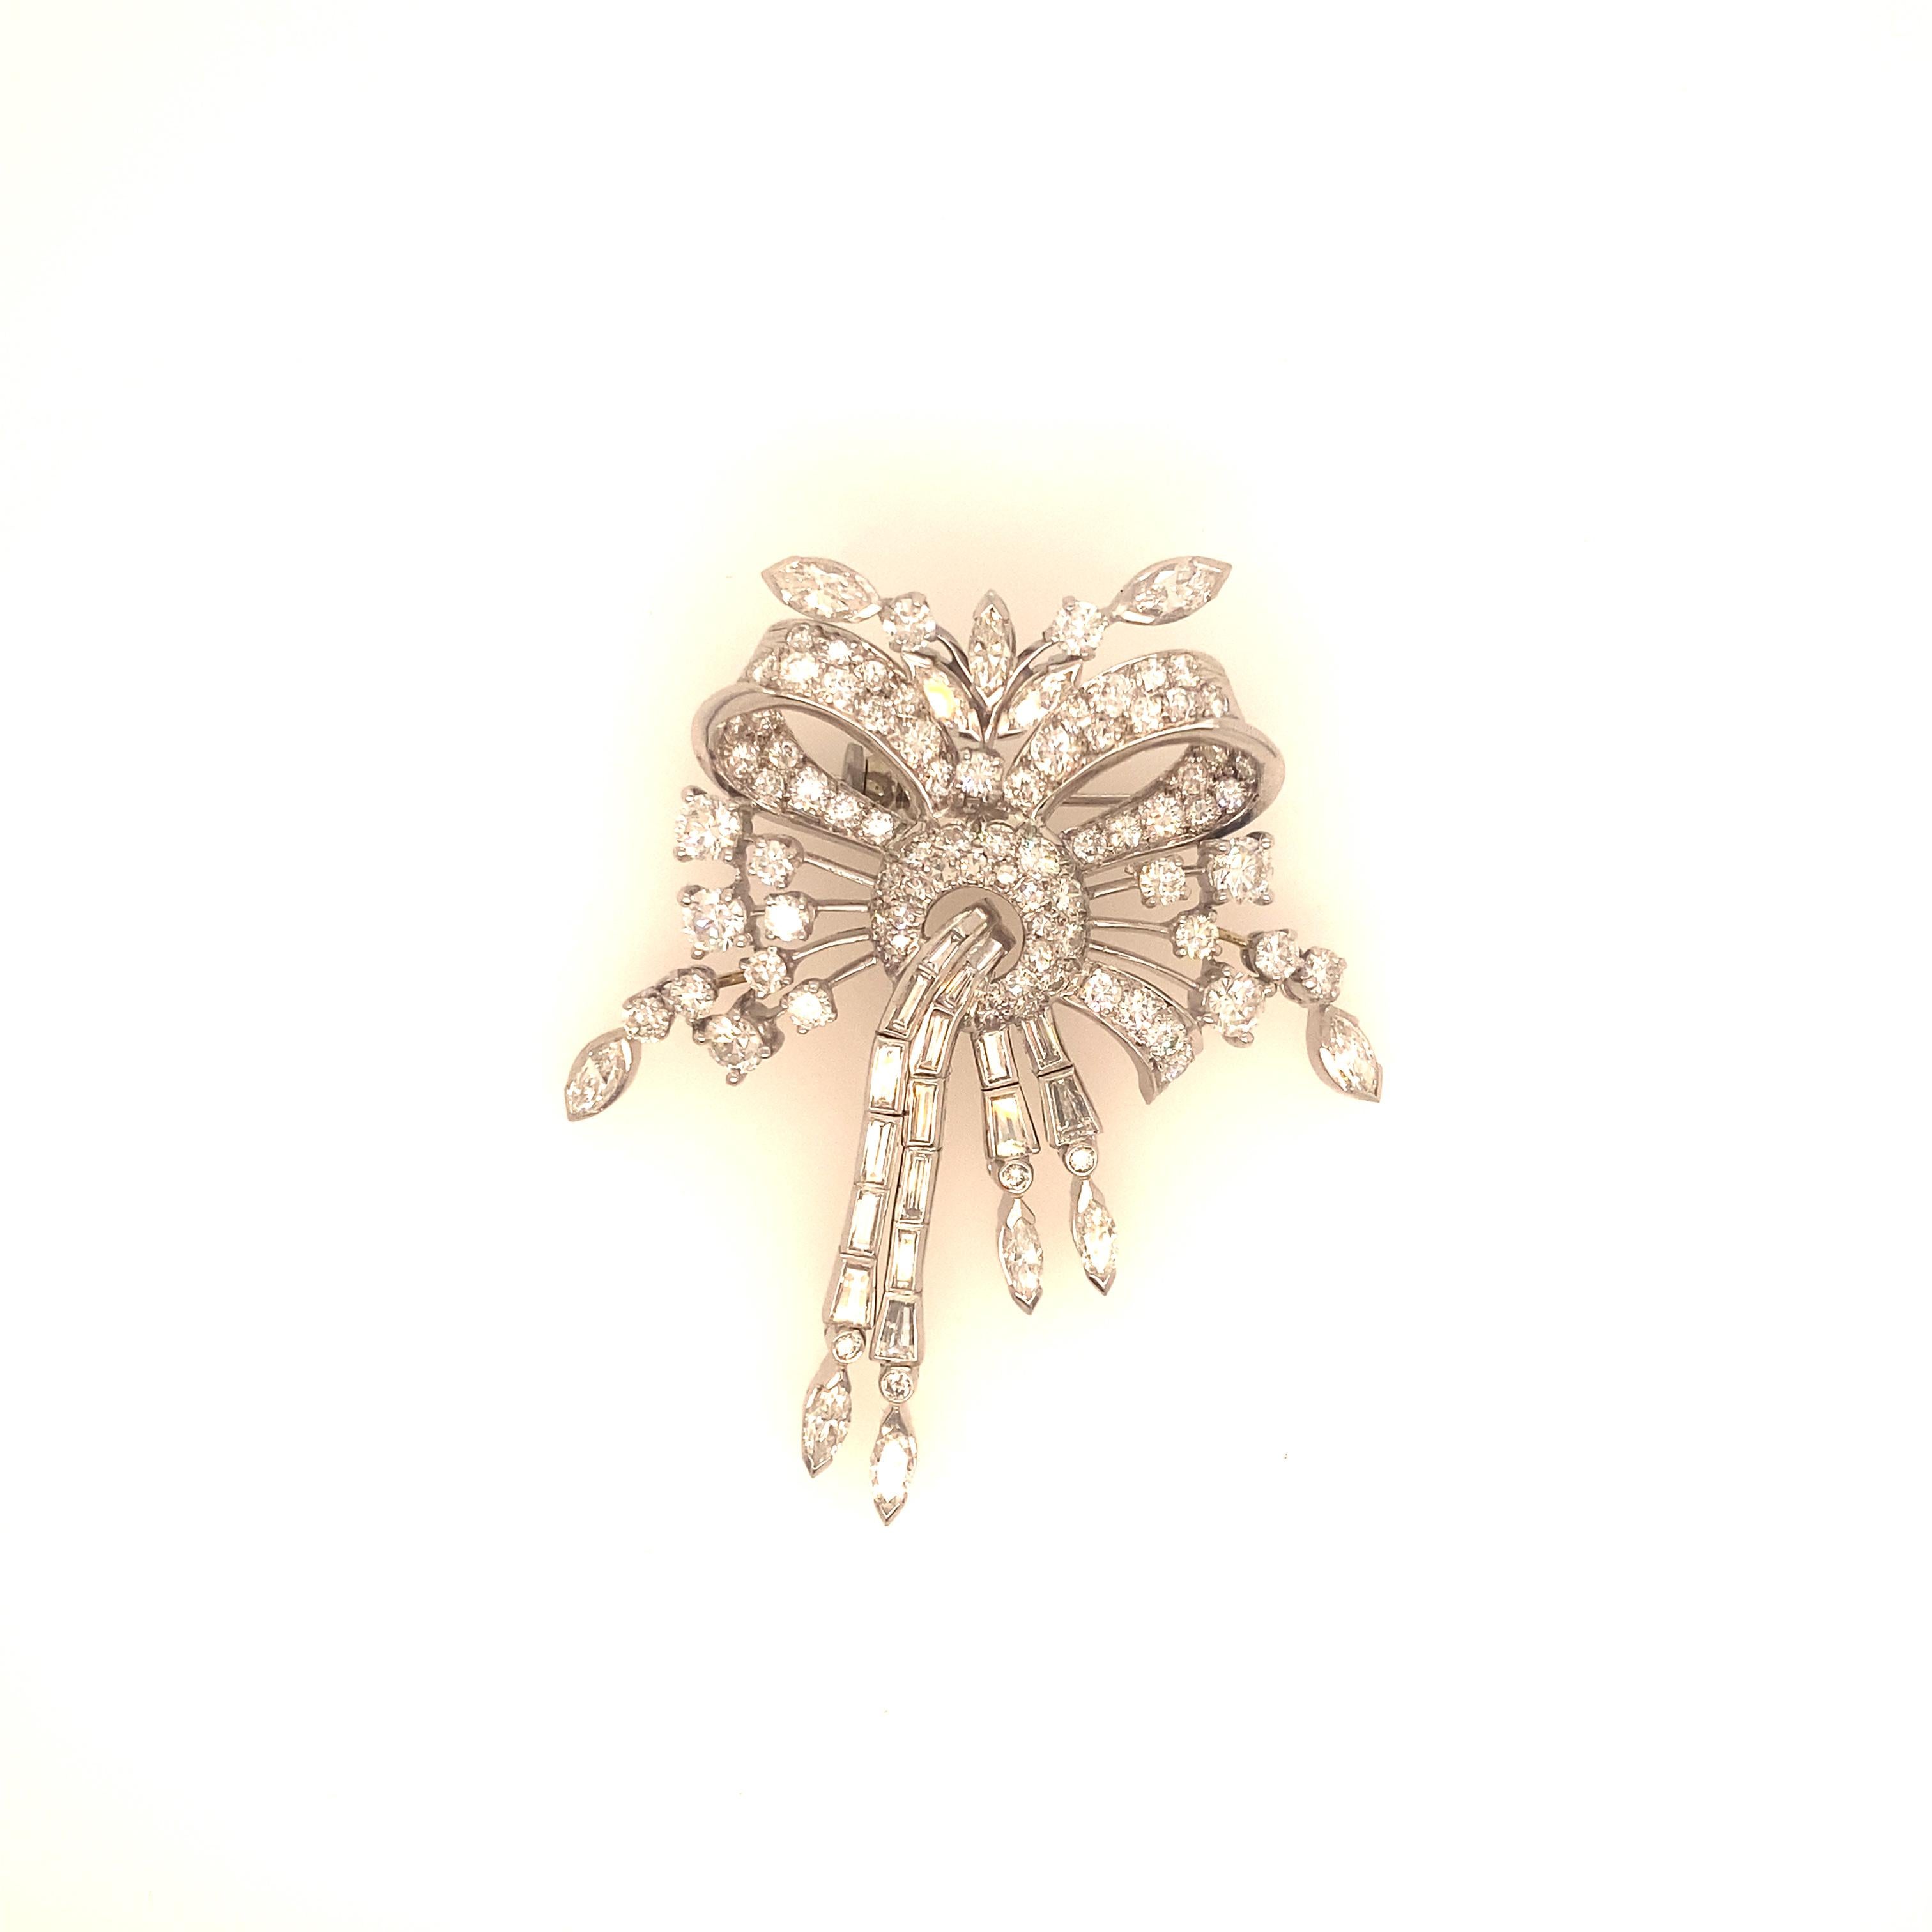 Platinum and Diamond Brooch Midcentury In Excellent Condition For Sale In Johns Creek, GA